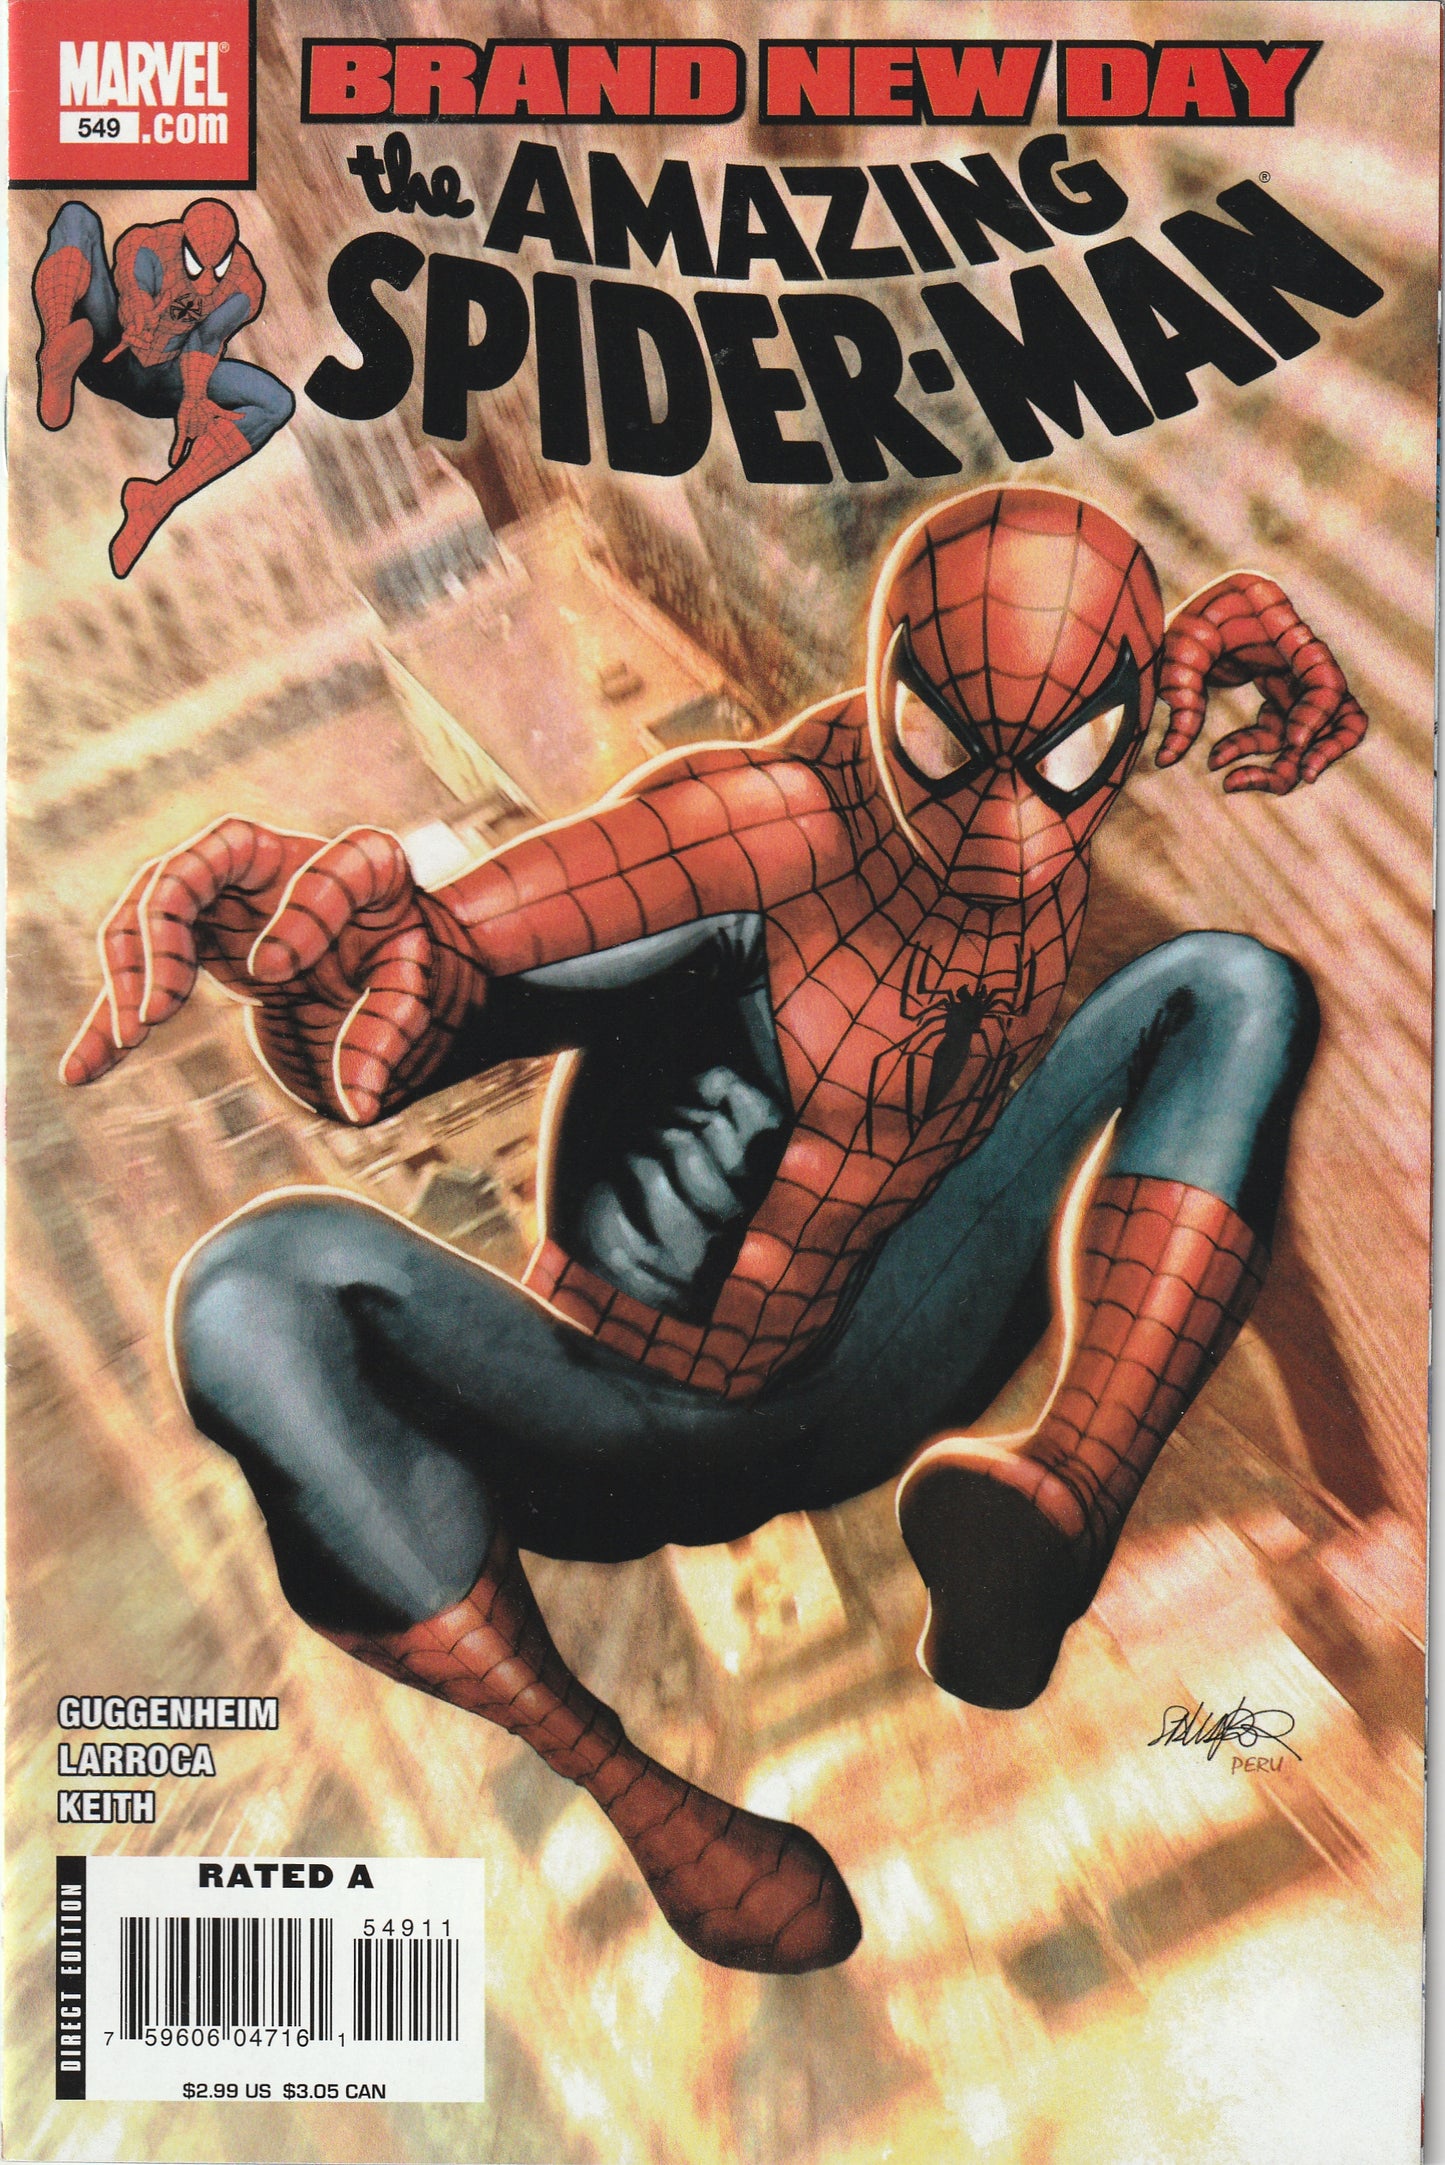 Amazing Spider-Man #549 (2008) Brand New Day - 2nd Appearance of Jackpot